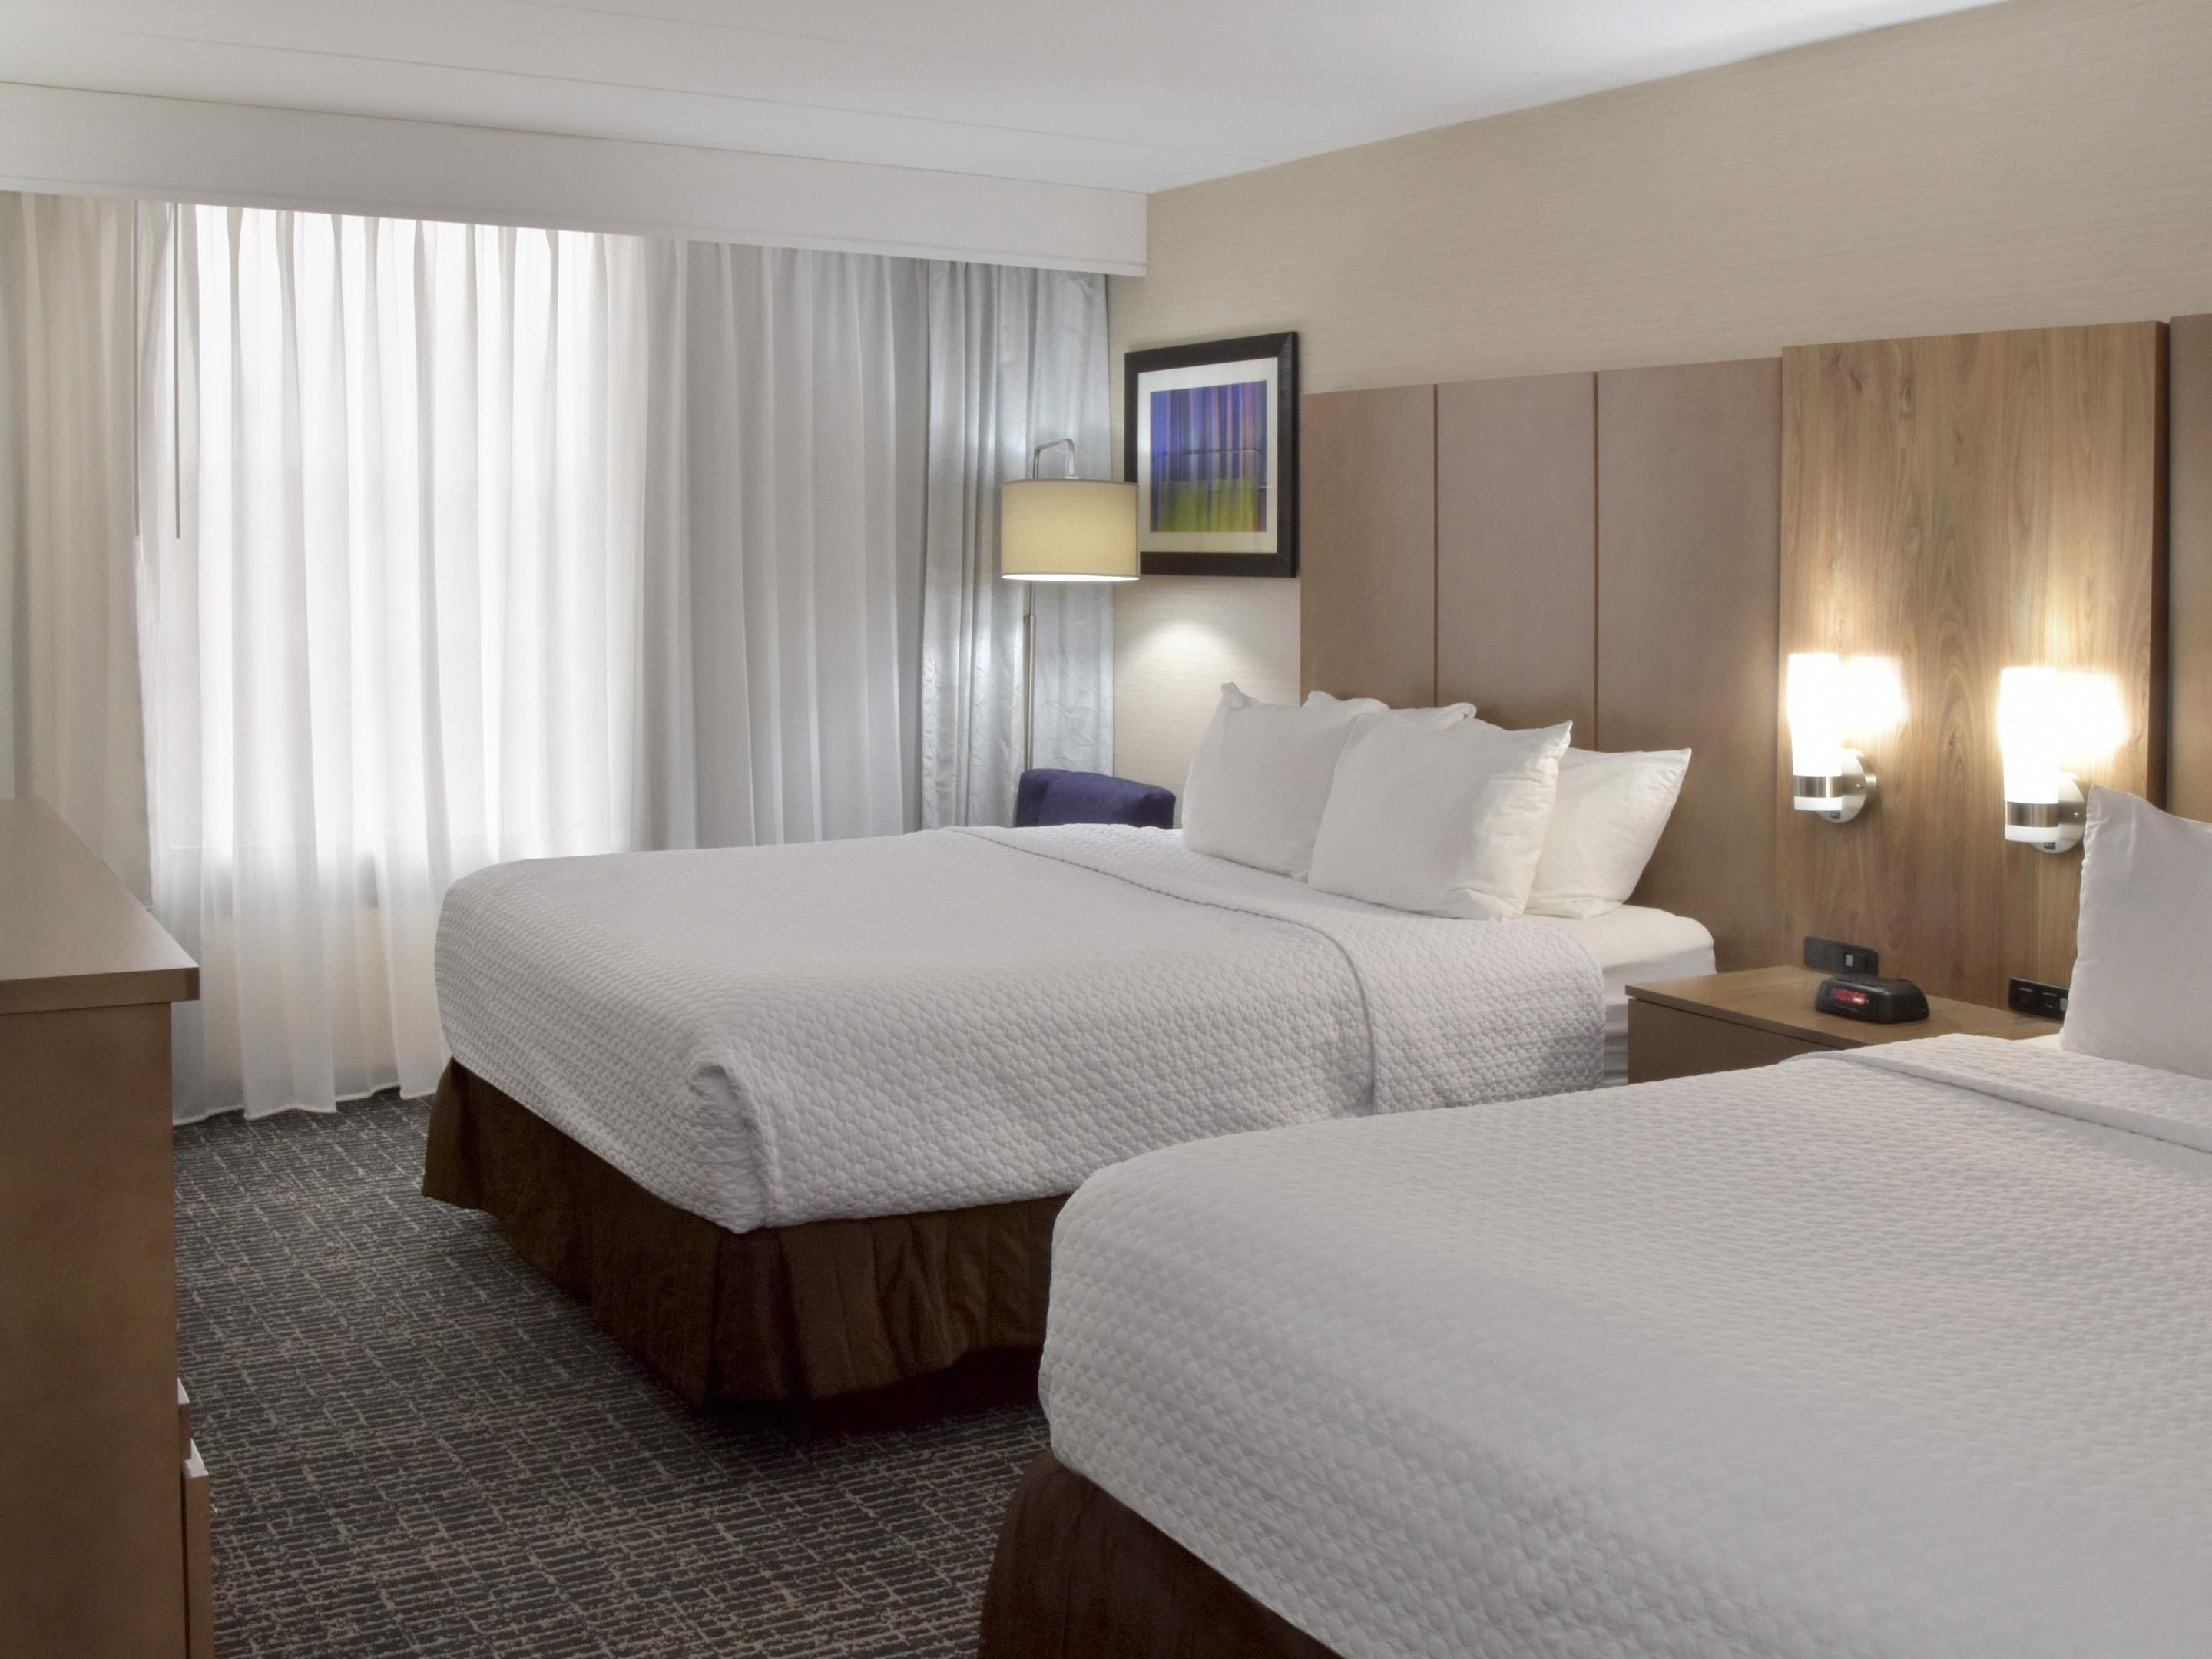 Deluxe King Bedded rooms include access to a private patio